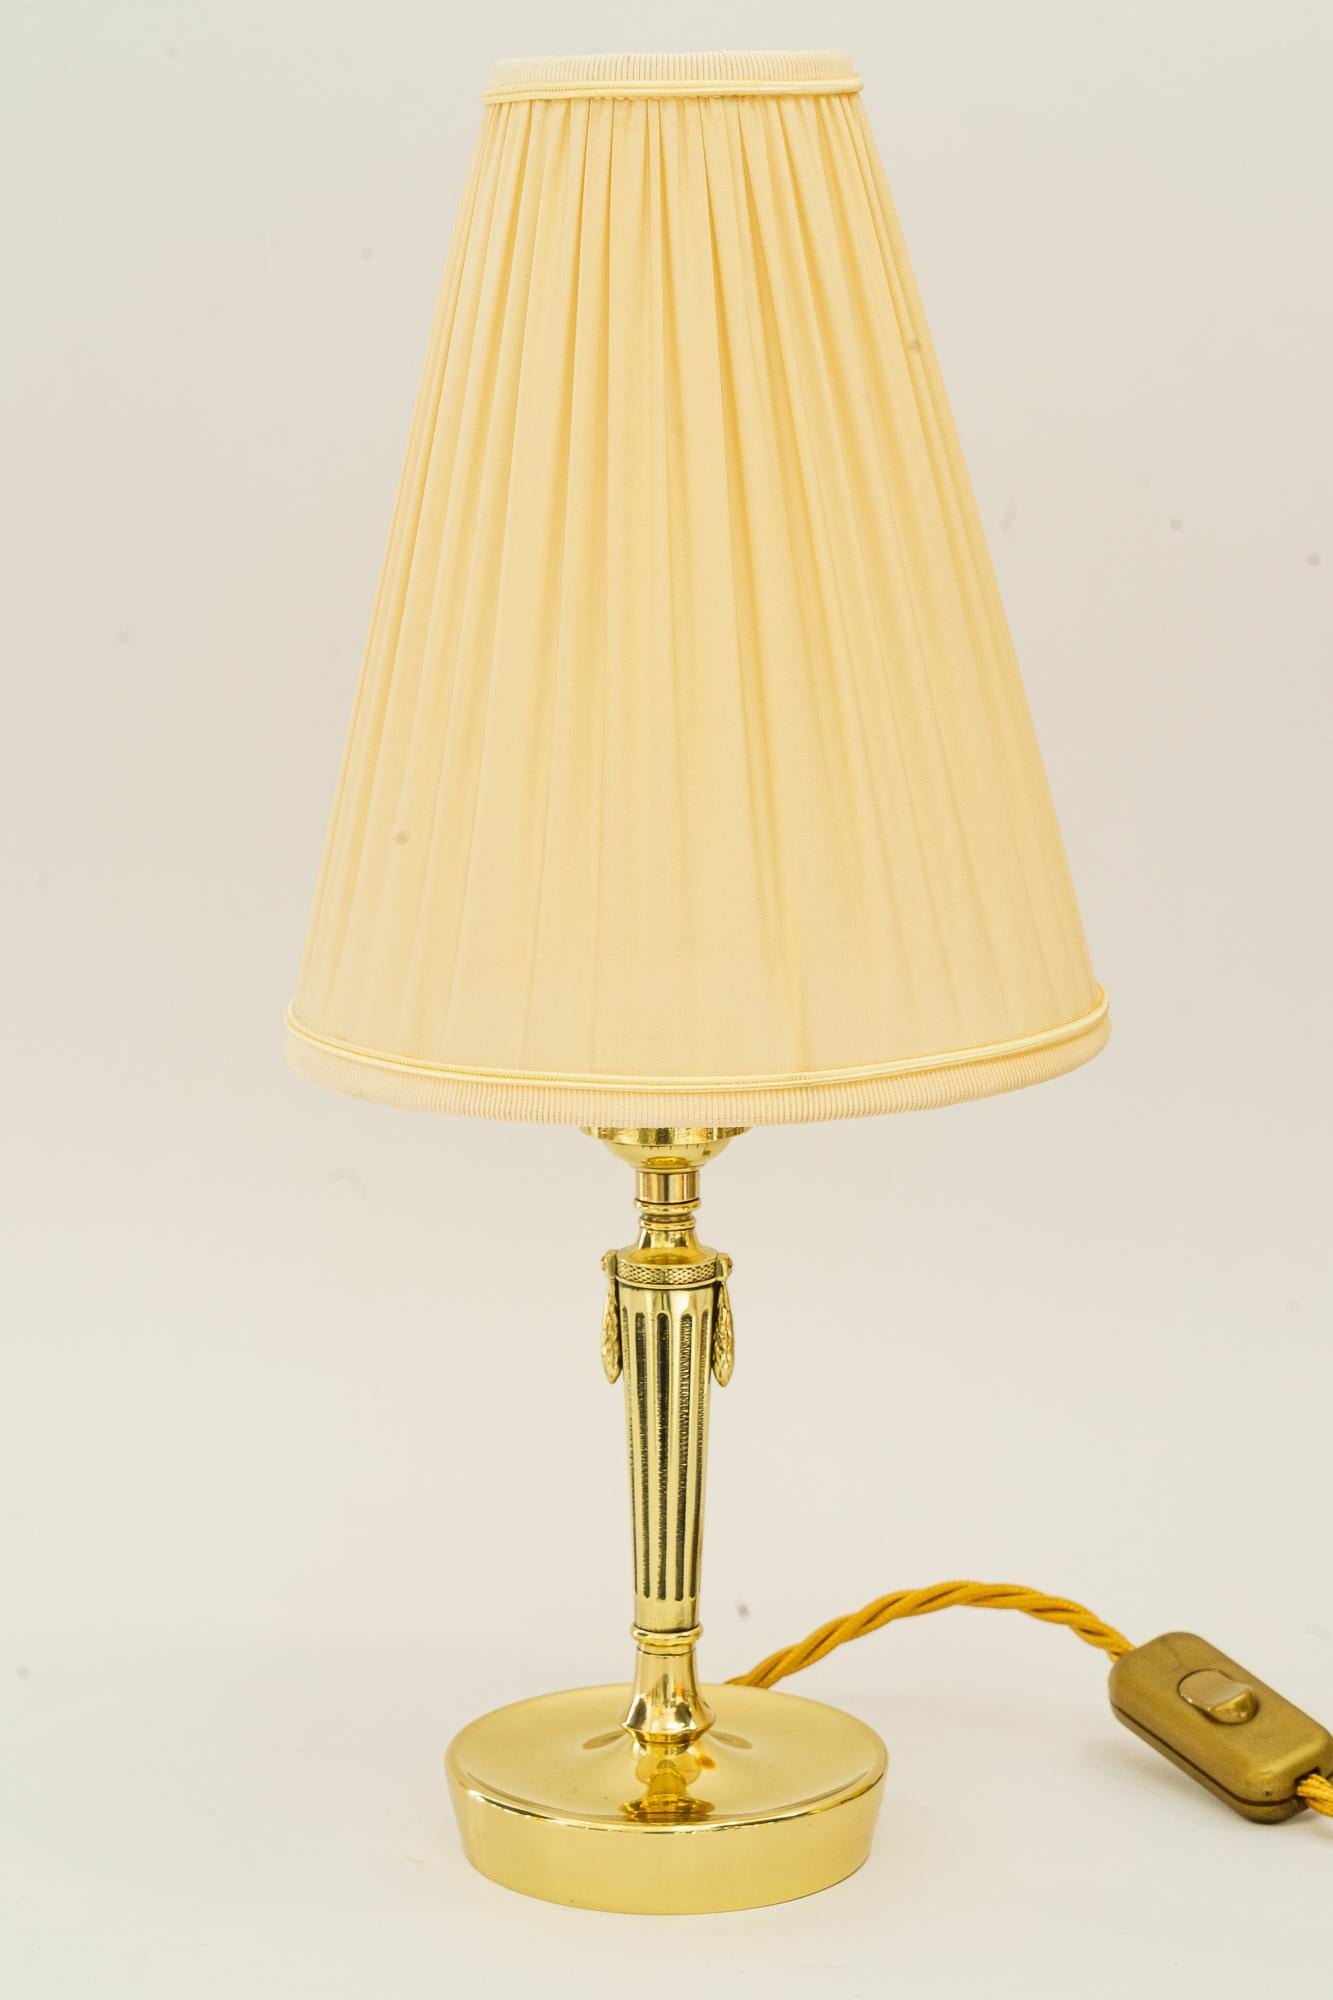 Art deco table lamp with fabric shade vienna around 1920s
Brass polished and stove enameled
The fabric shade is replaced ( new )
